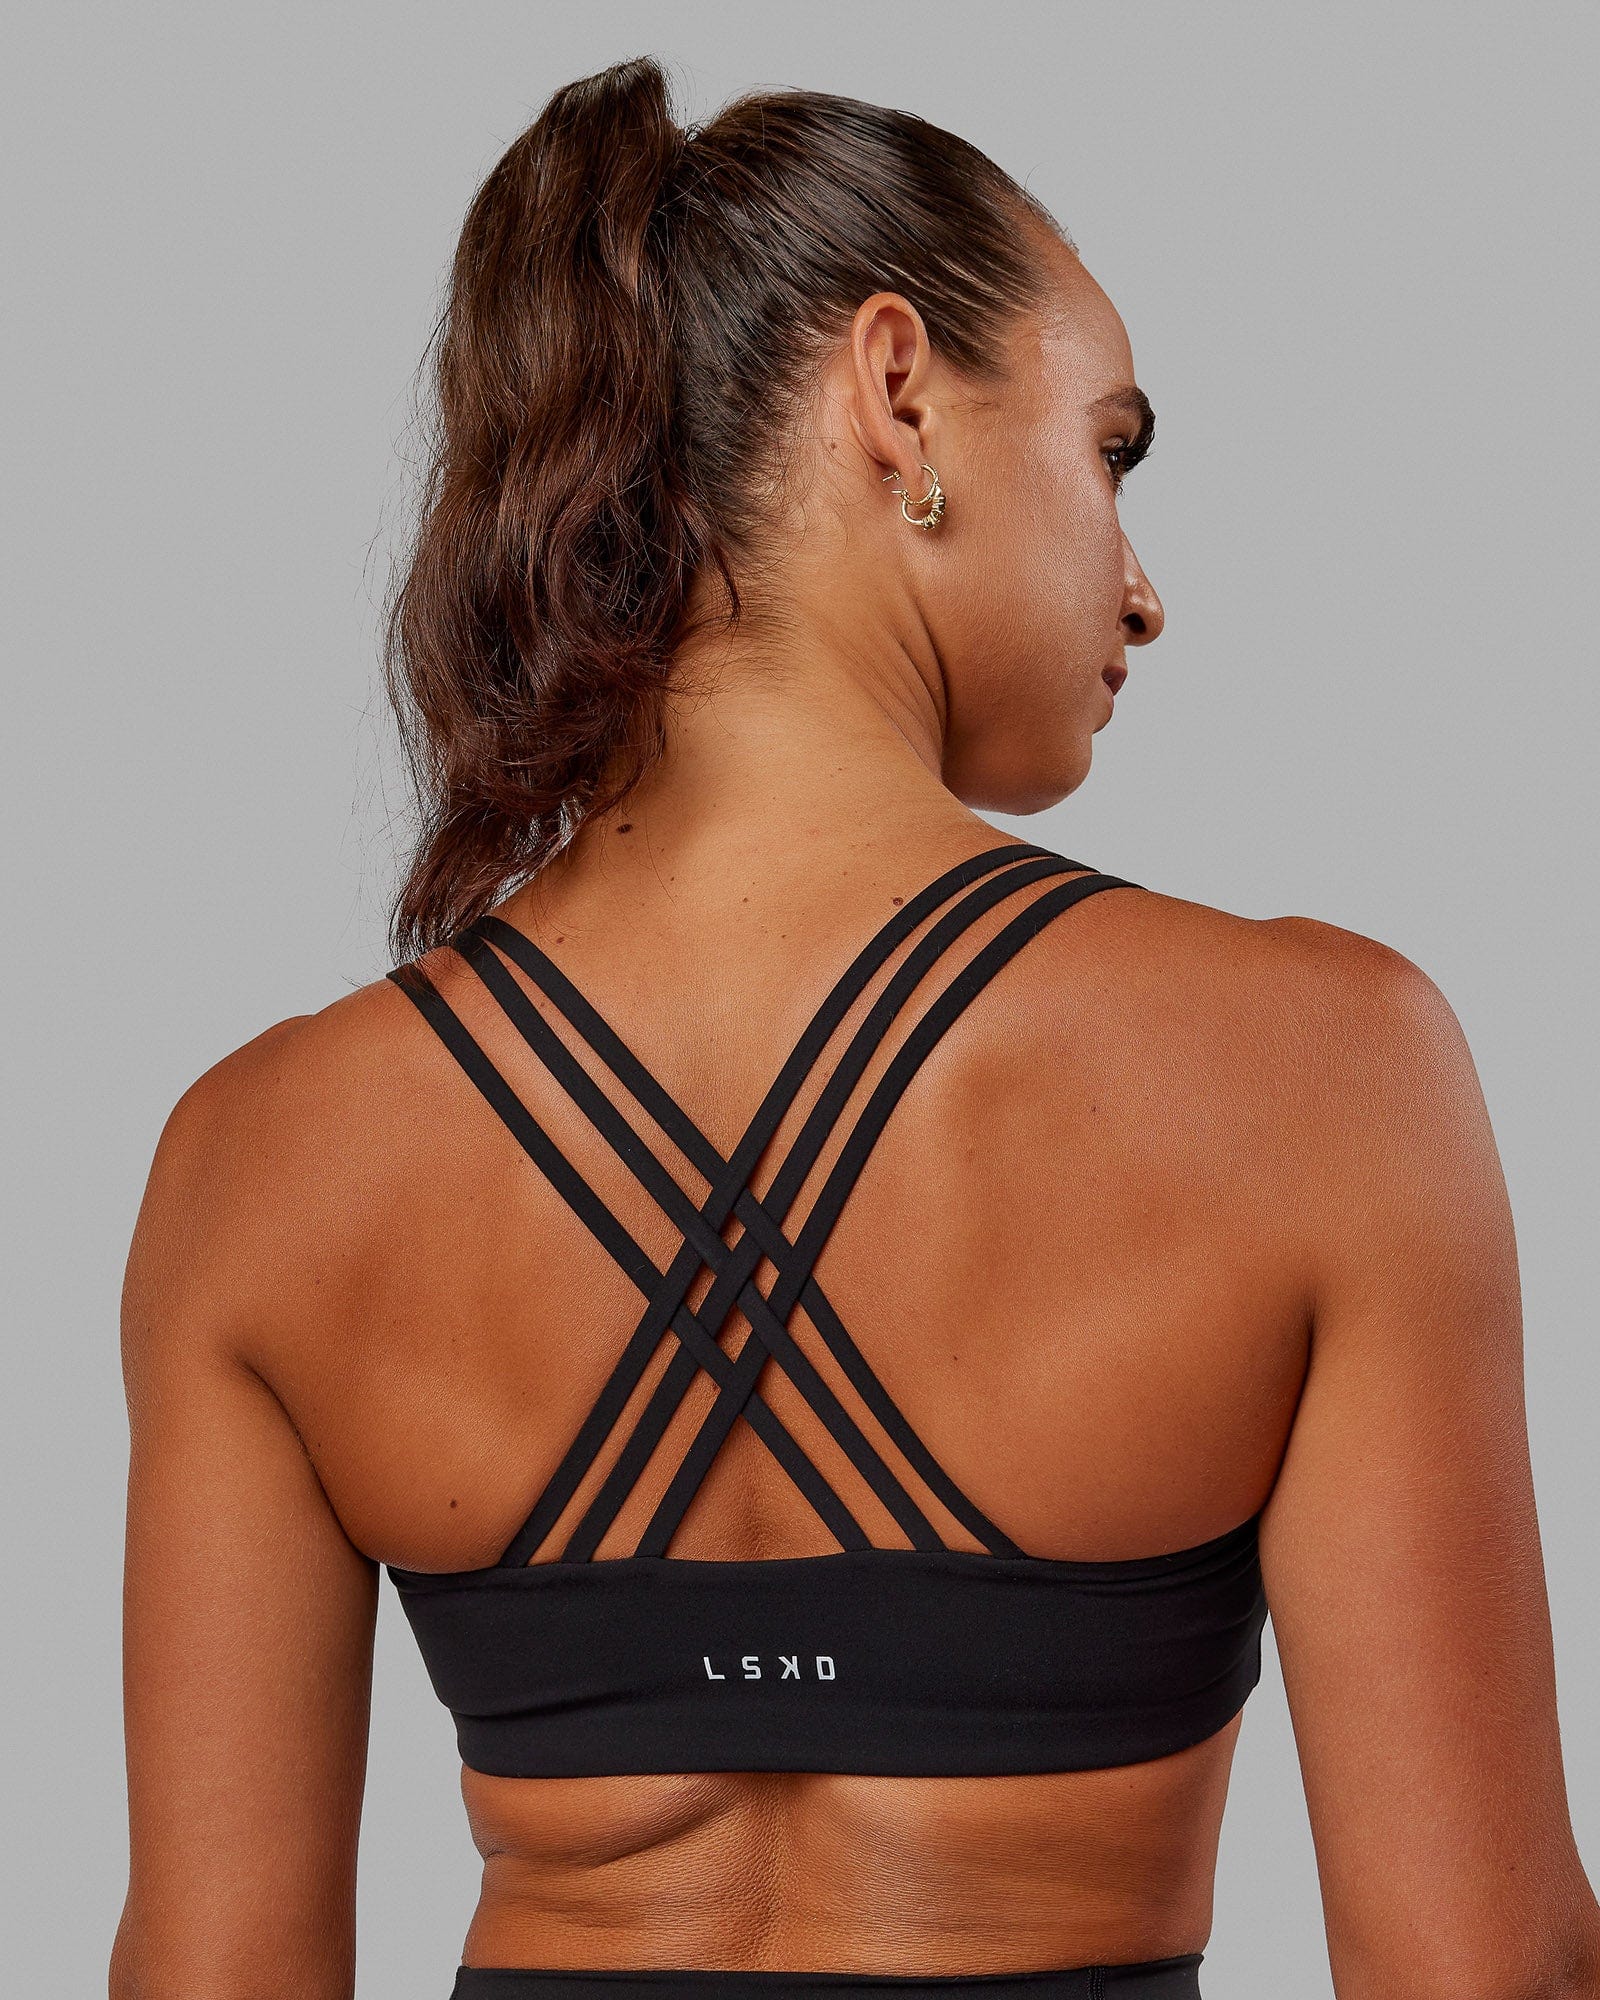 LSKD - A little commotion for the Agile Sports Bra 🦩⁠💗⁠ ✨ Double-lined  (no padding needed)⁠ ✨⁠ Relaxed everyday fit⁠ ✨⁠ Twist design bust detail &  roulette back strap⁠ ⁠ Rep Now